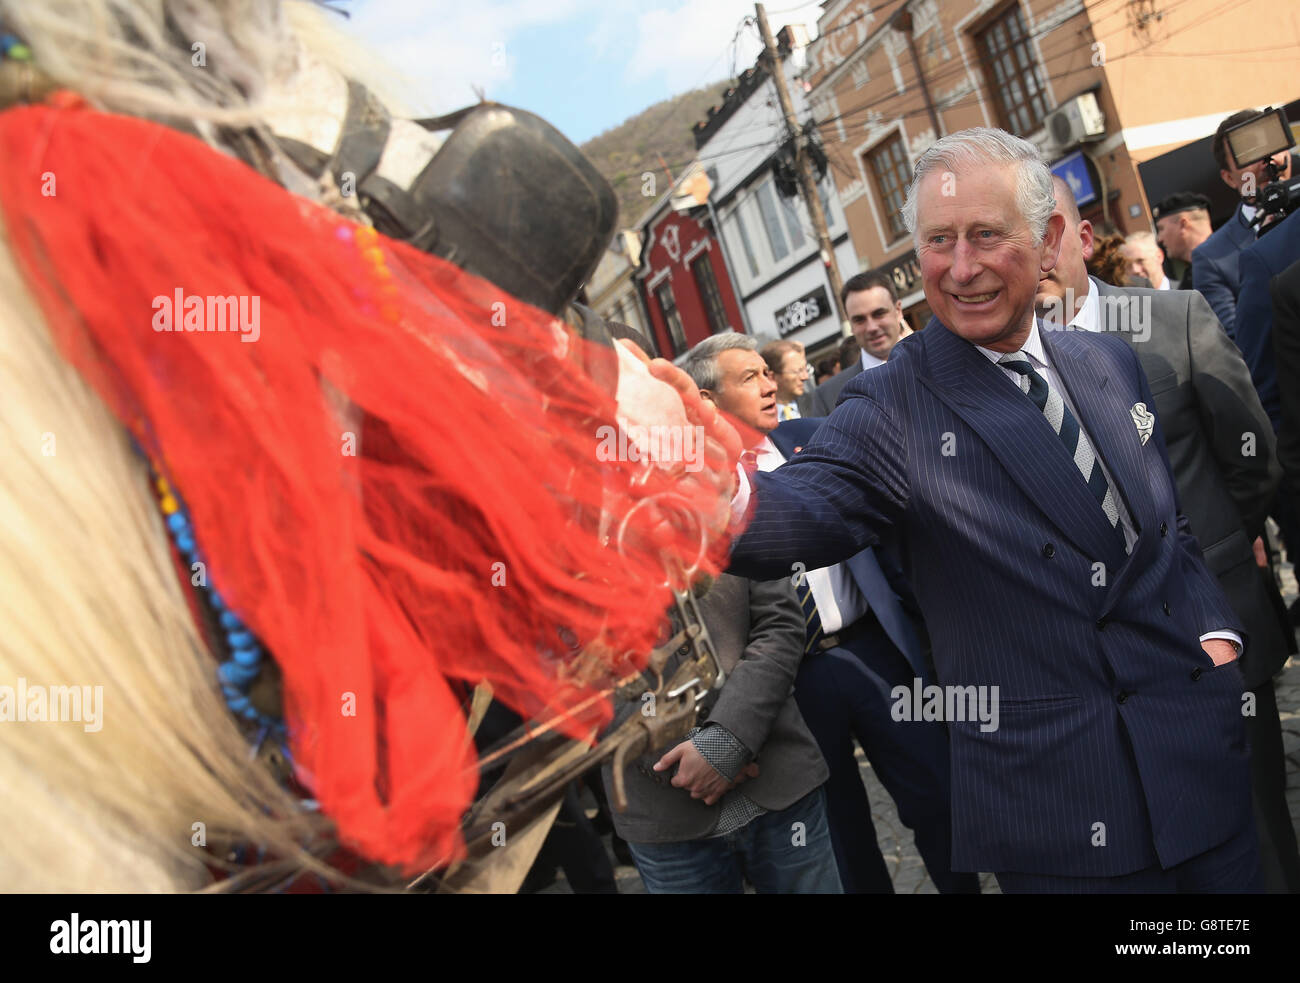 The Prince of Wales greets a horse tied to a carriage in the old city center in Prizren, Kosovo. Stock Photo